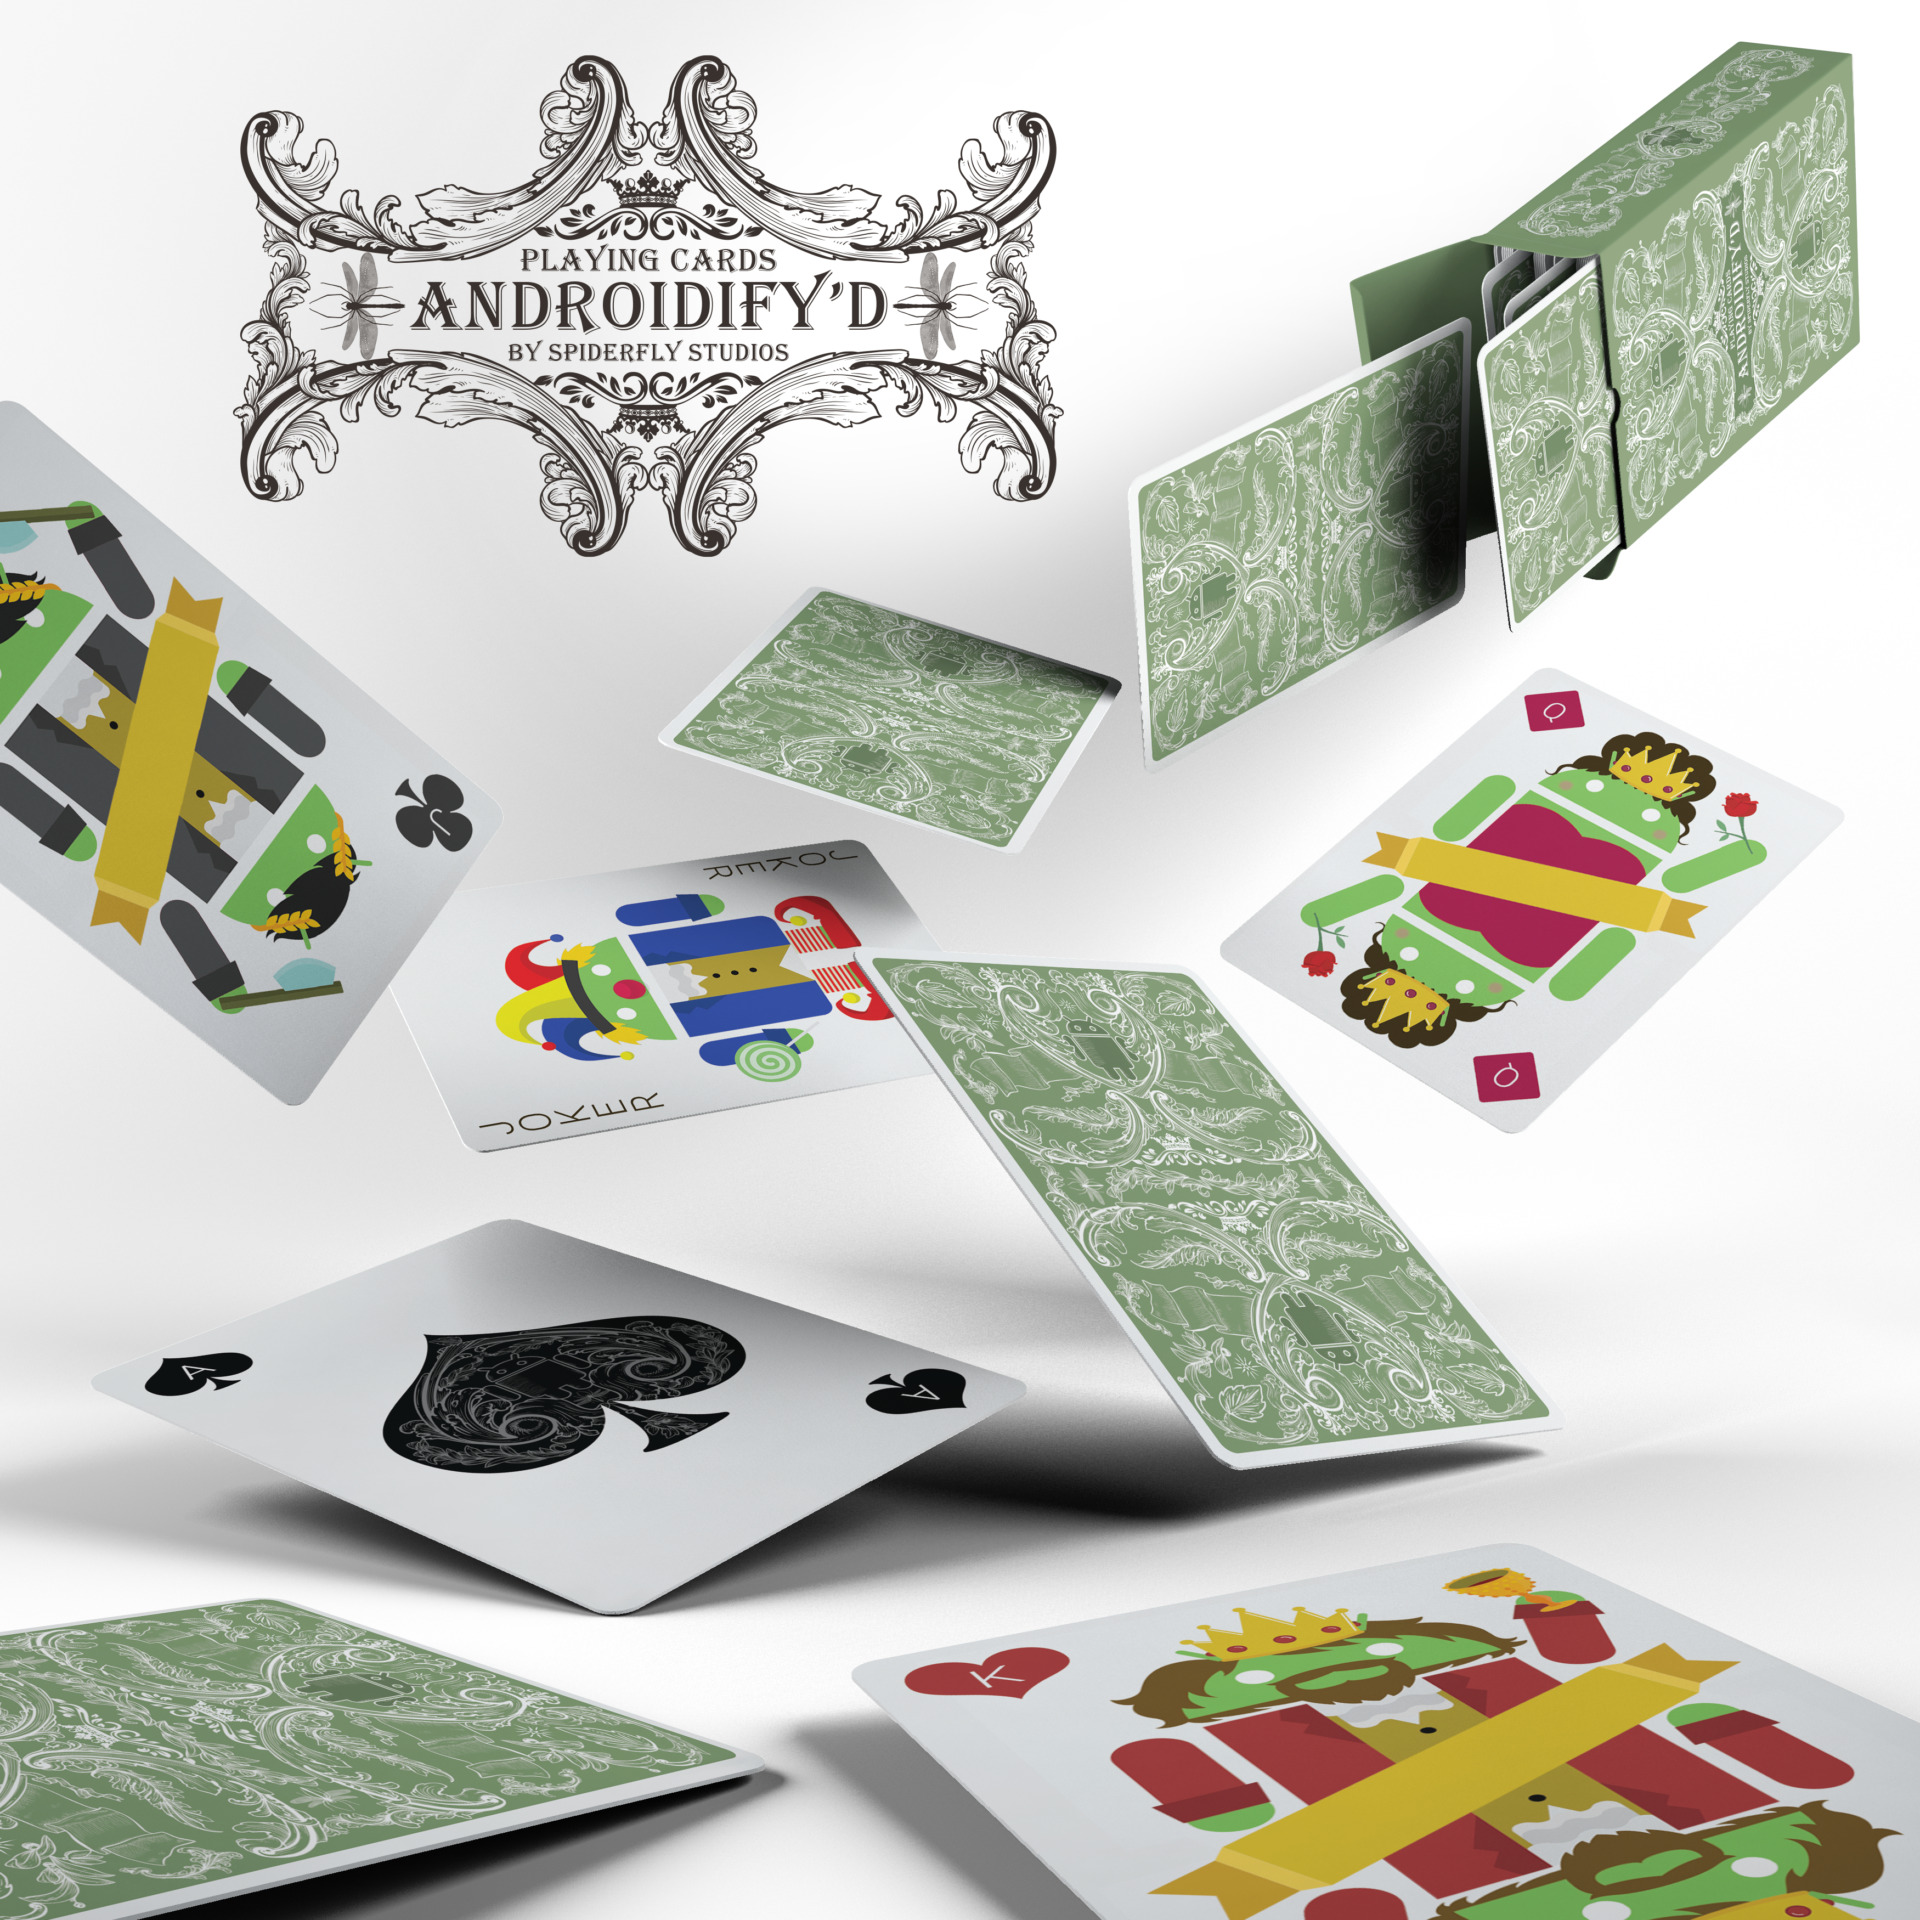 Androidify Playing Cards